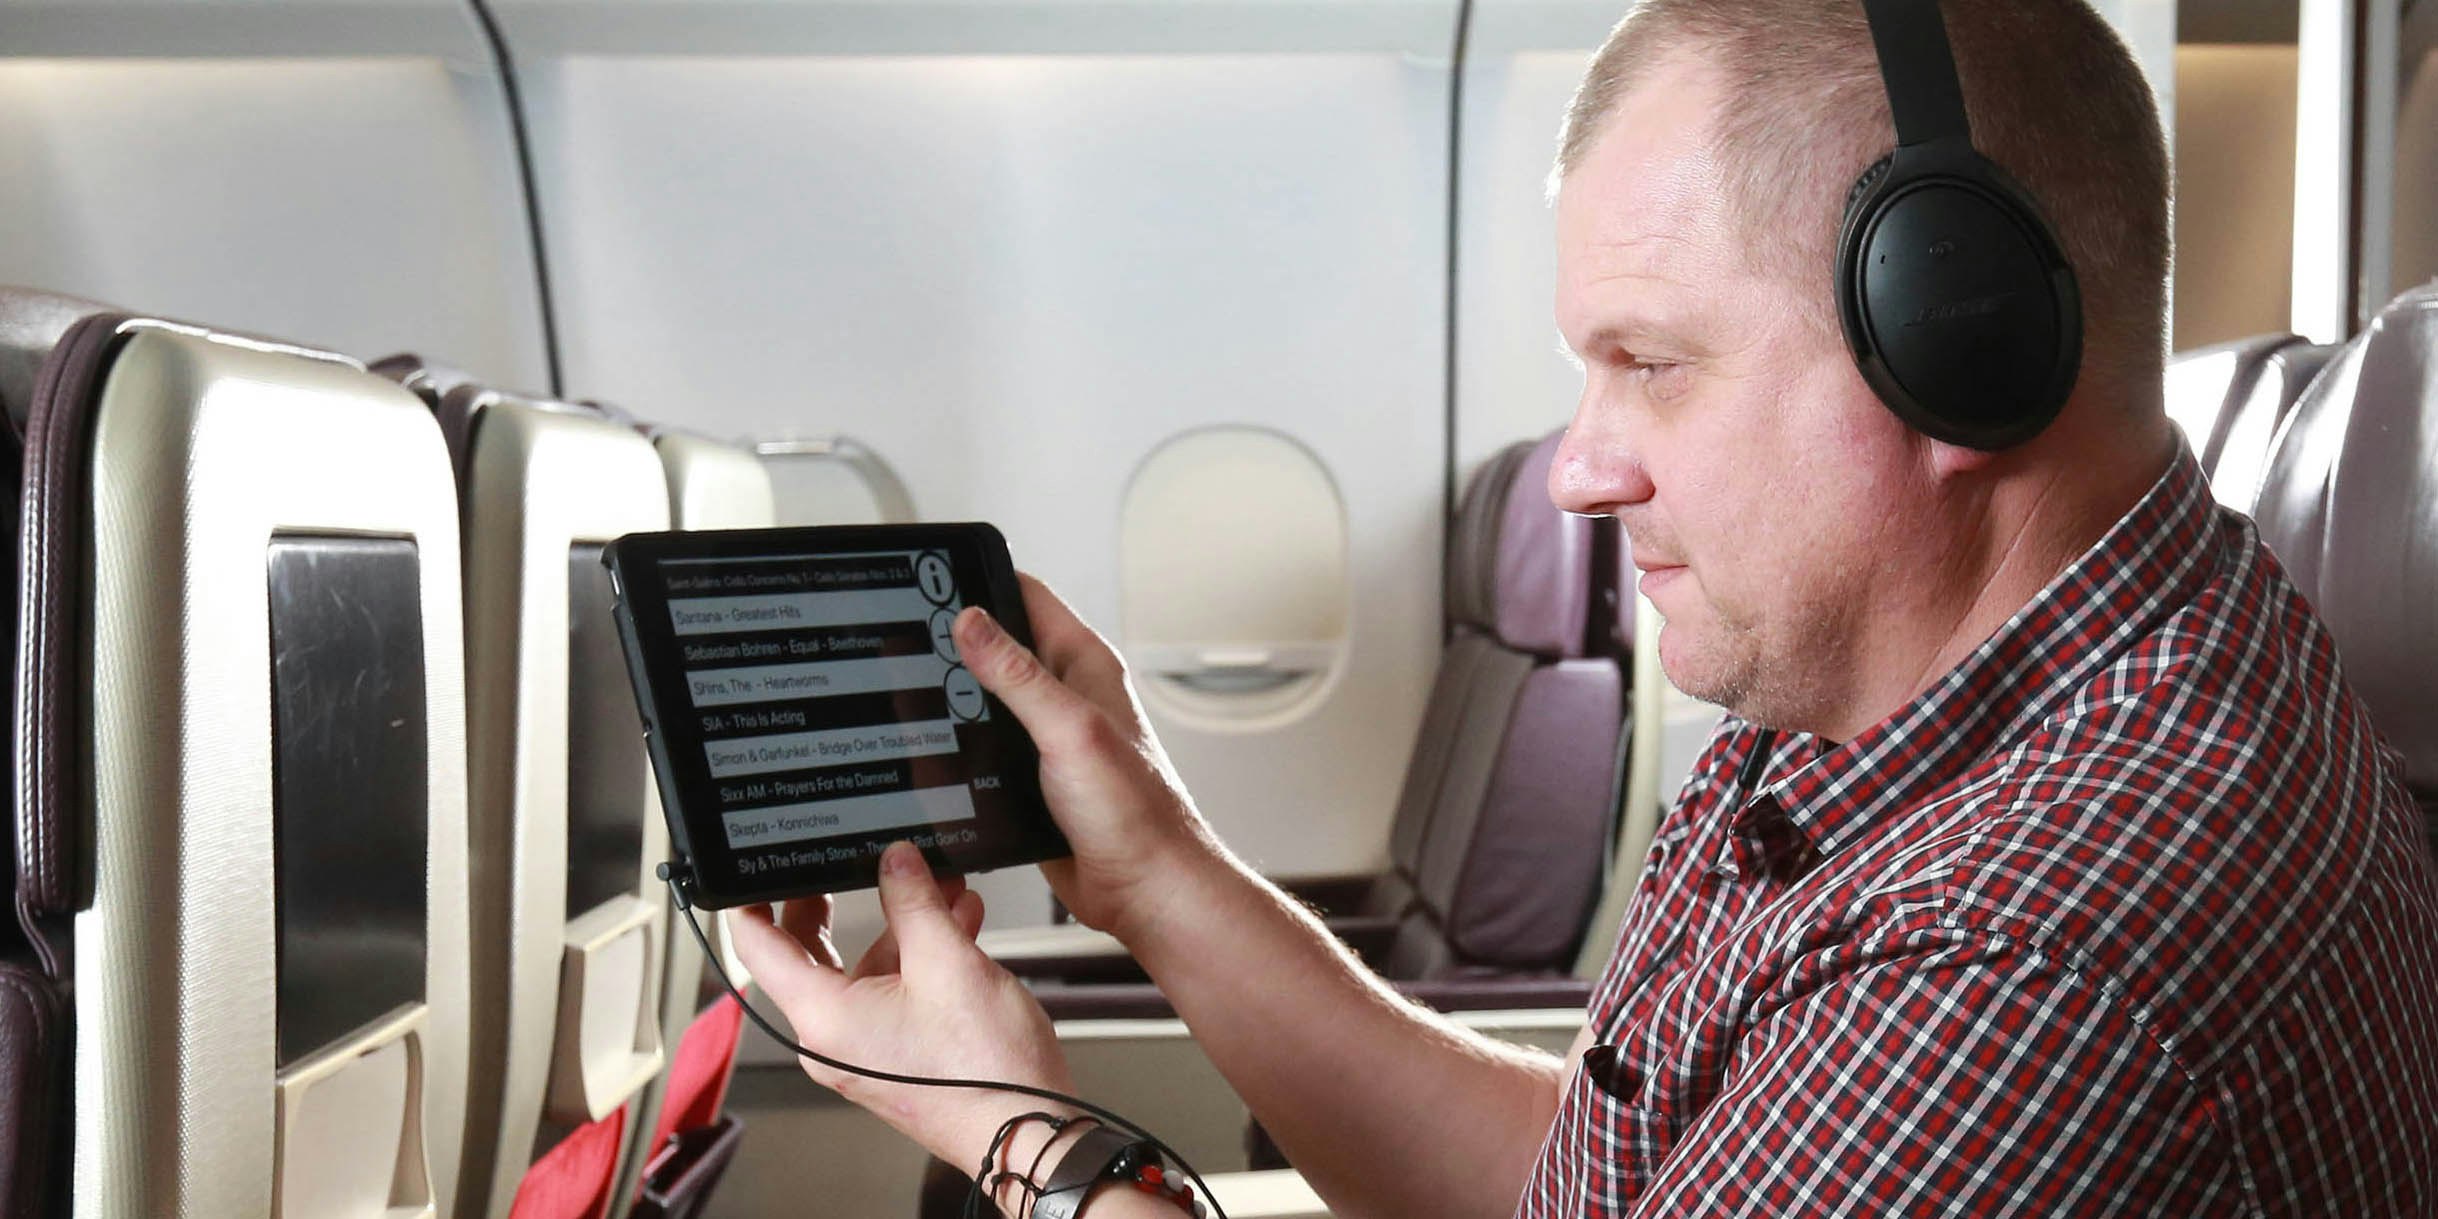 A man sitting in an airplane has his headphones plugged into an iPad. On the screen, the text is large and in black and white contrast.